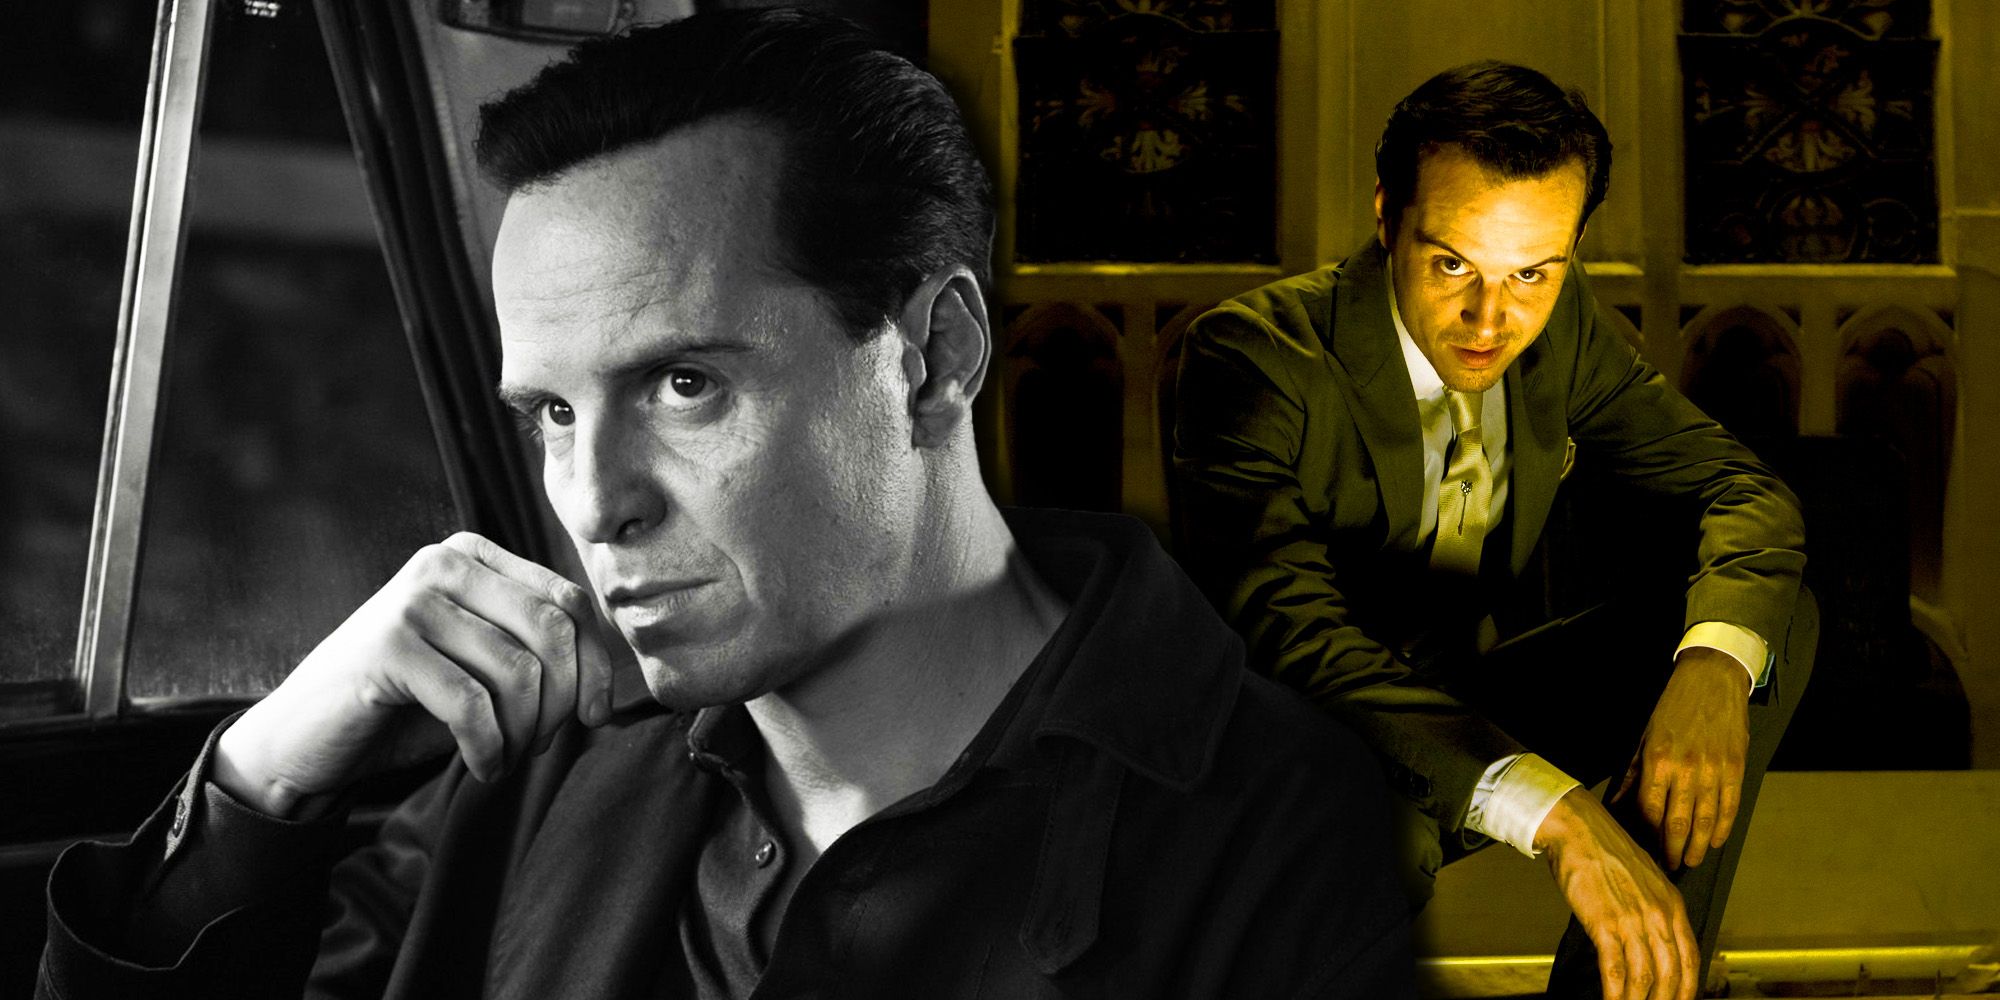 Andrew Scott in Ripley and as Moriarty in Sherlock